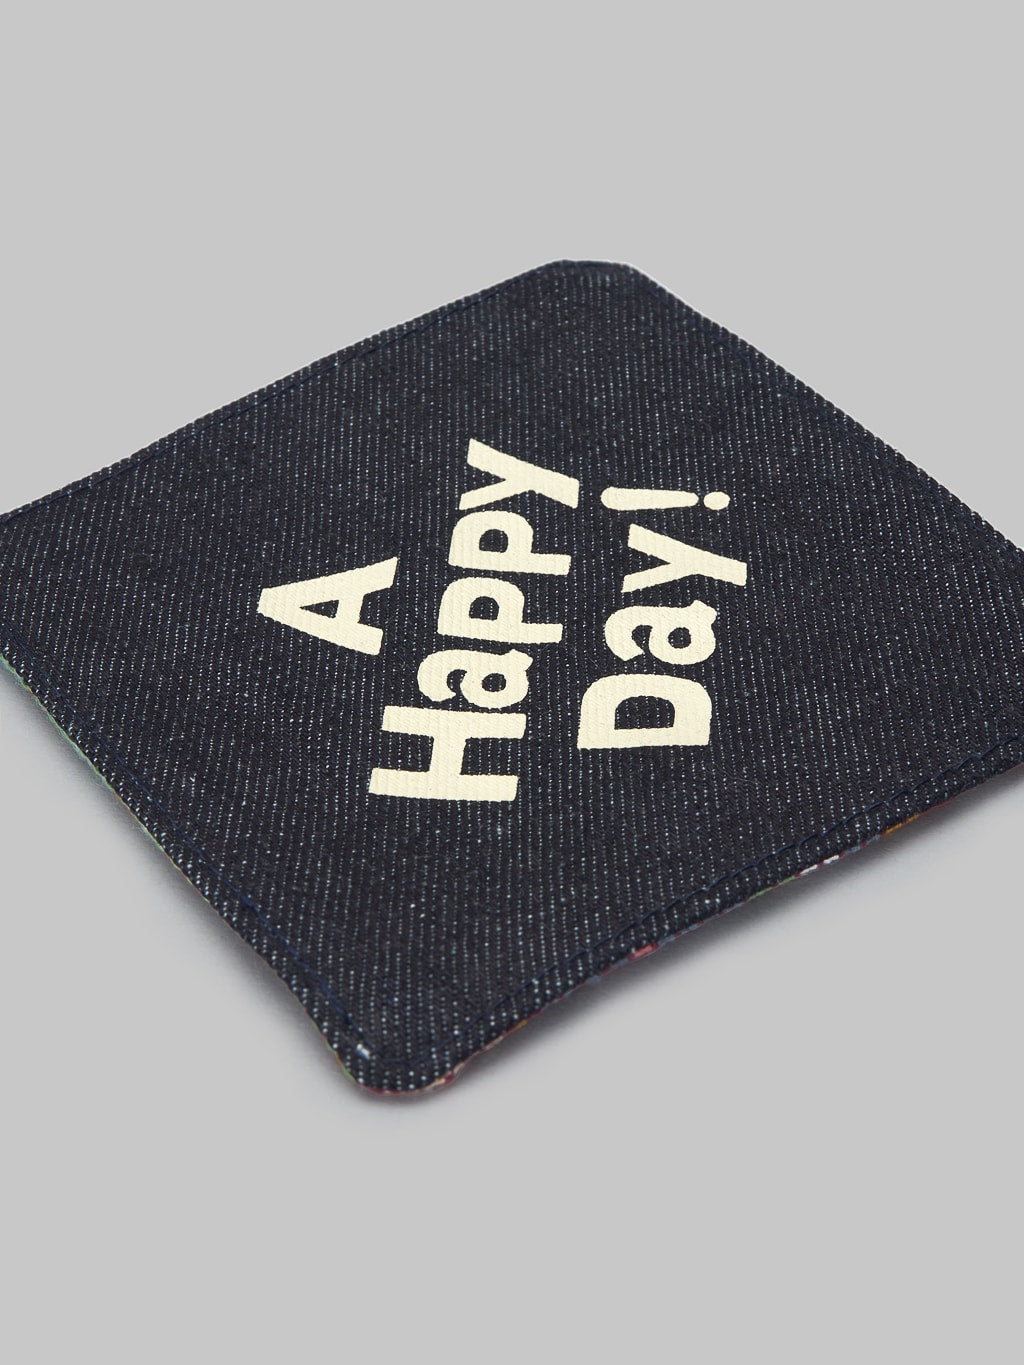 UES Denim Happy Day Coaster made in japan